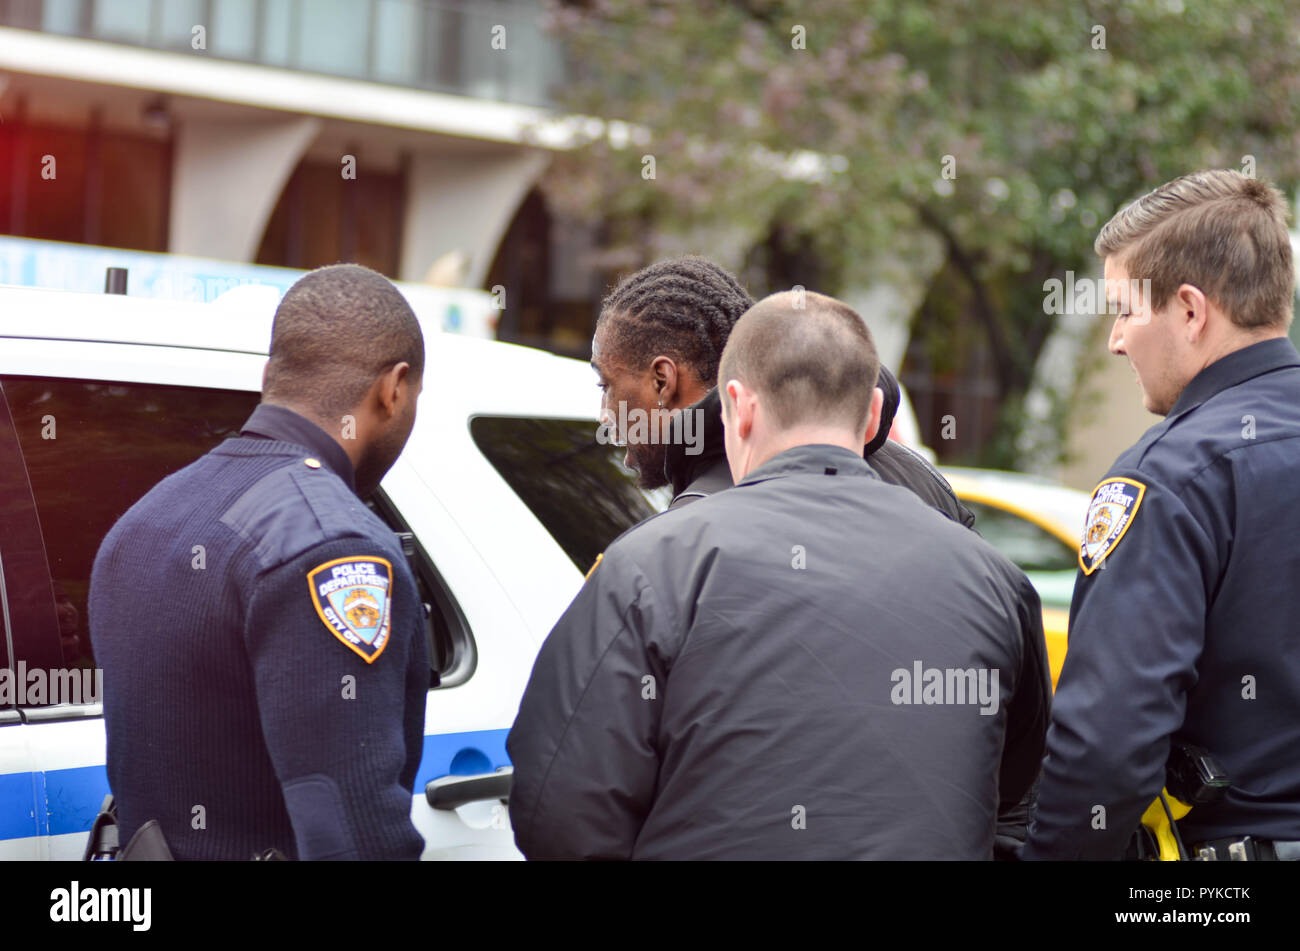 NYPD officers are seen arresting a bike messenger for unknown reasons at the 7th Avenue and 59th street  (Central Park) in New York City. Stock Photo